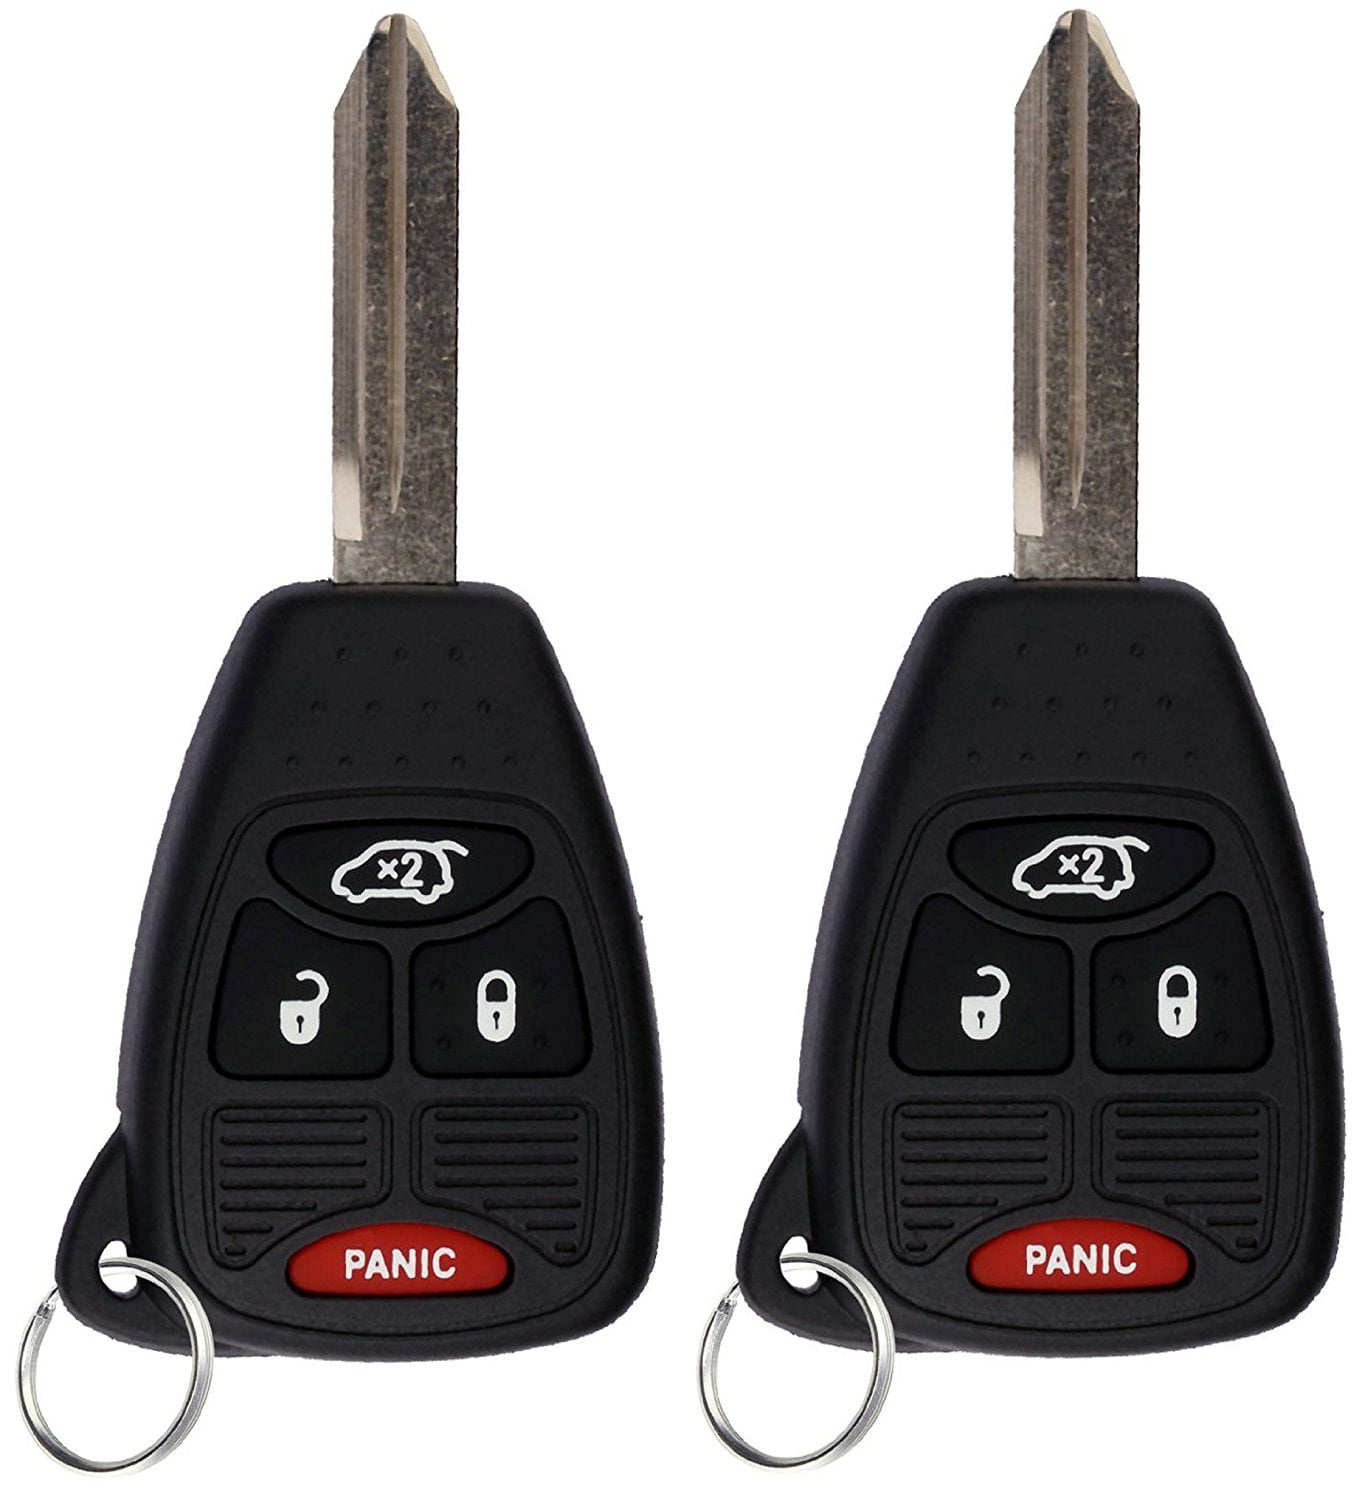 2 NEW Uncut Replacement Key-Fob Keyless Entry Remote for Dodge 2008-2013 Durango 